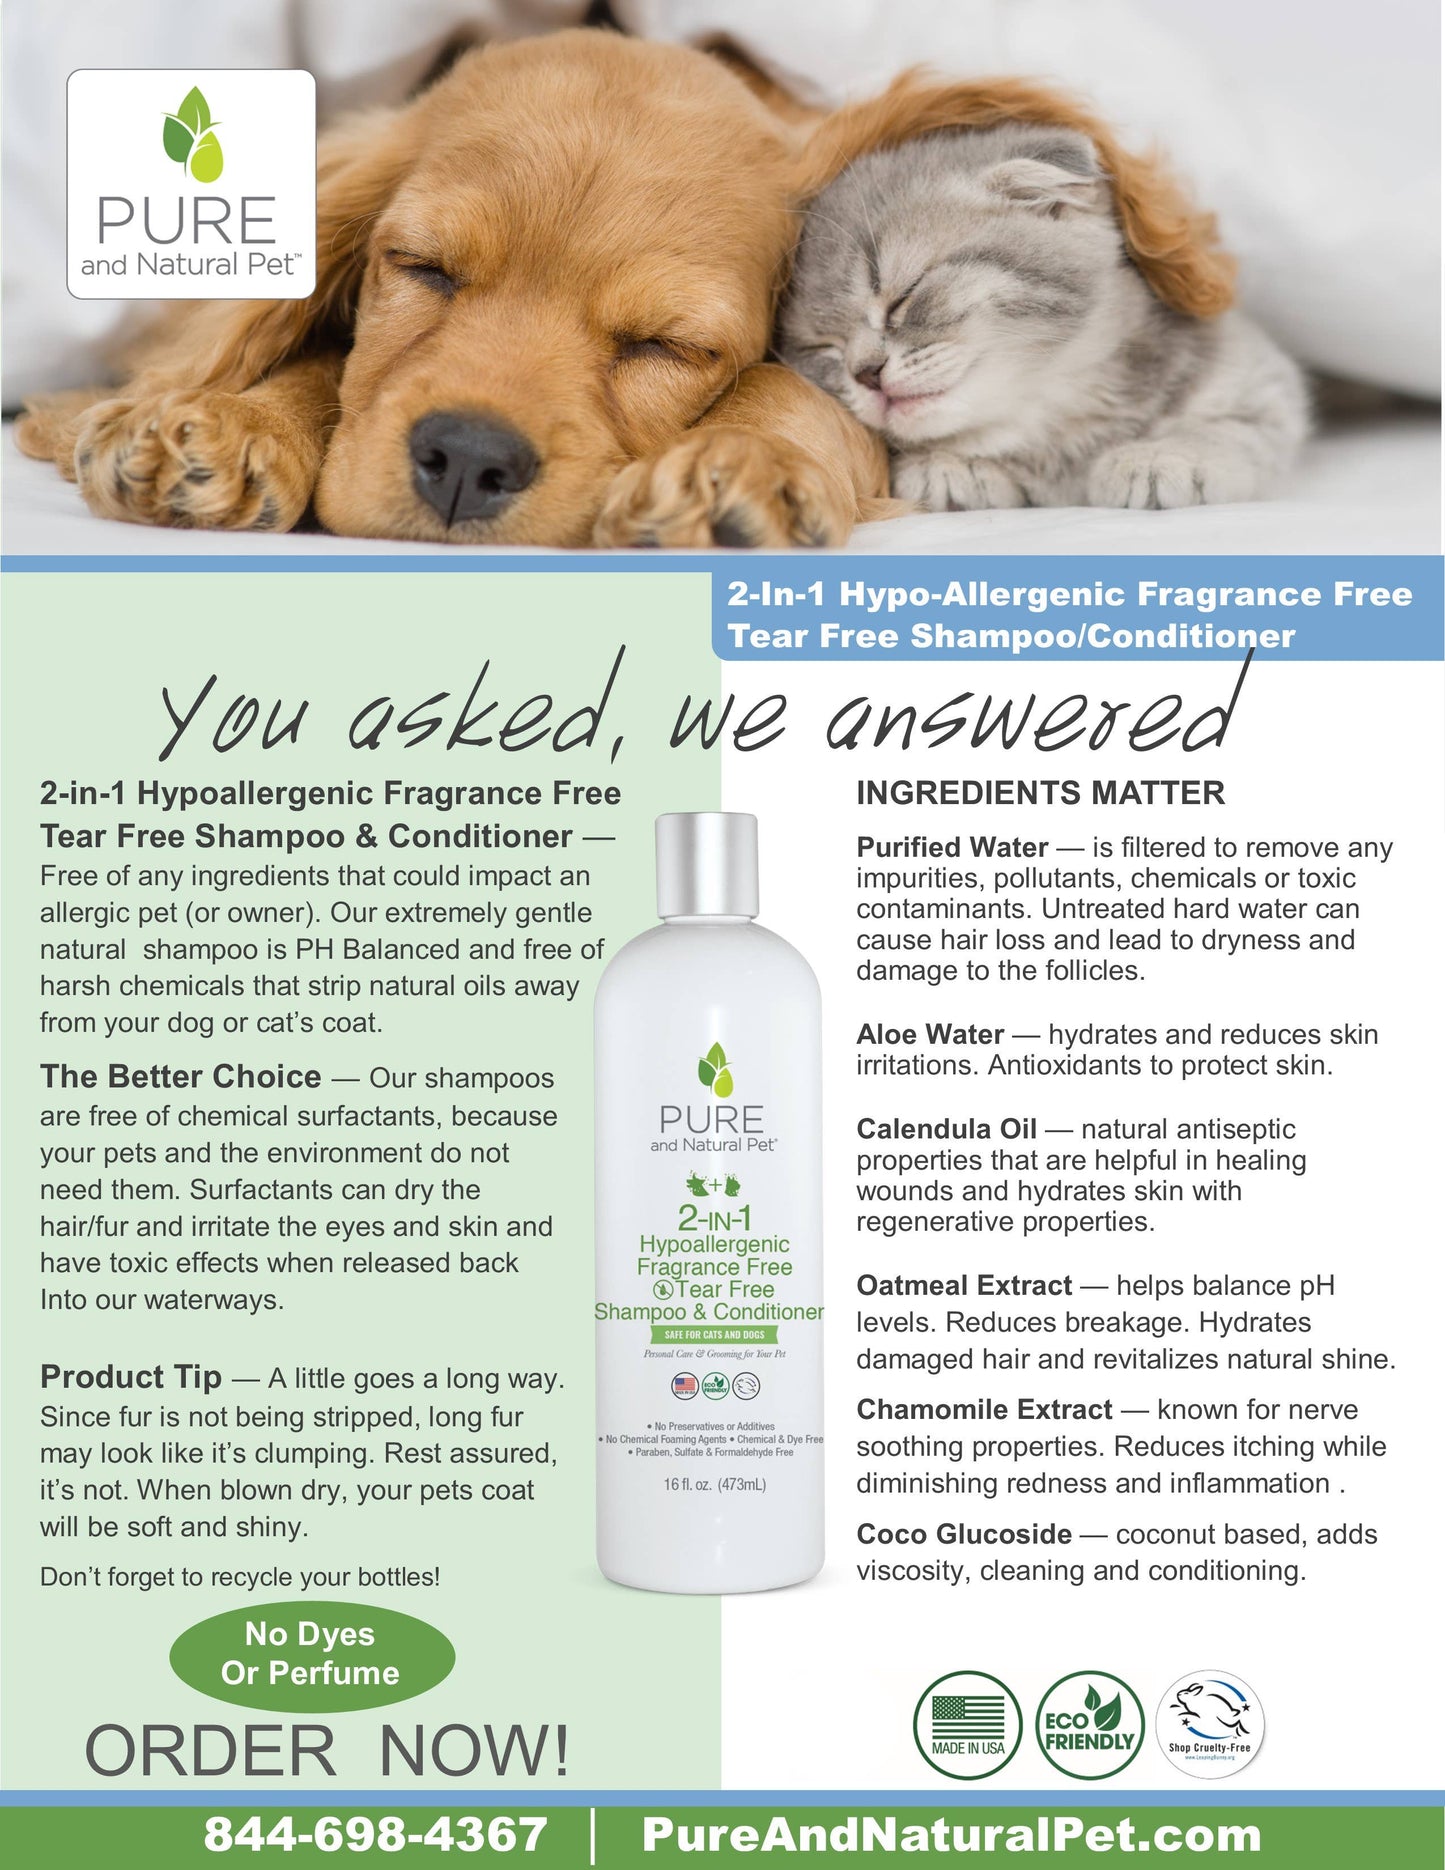 Pure and Natural Pet - 2-in-1 Hypoallergenic Fragrance+Tear Free Shampoo/Conditionr  Image